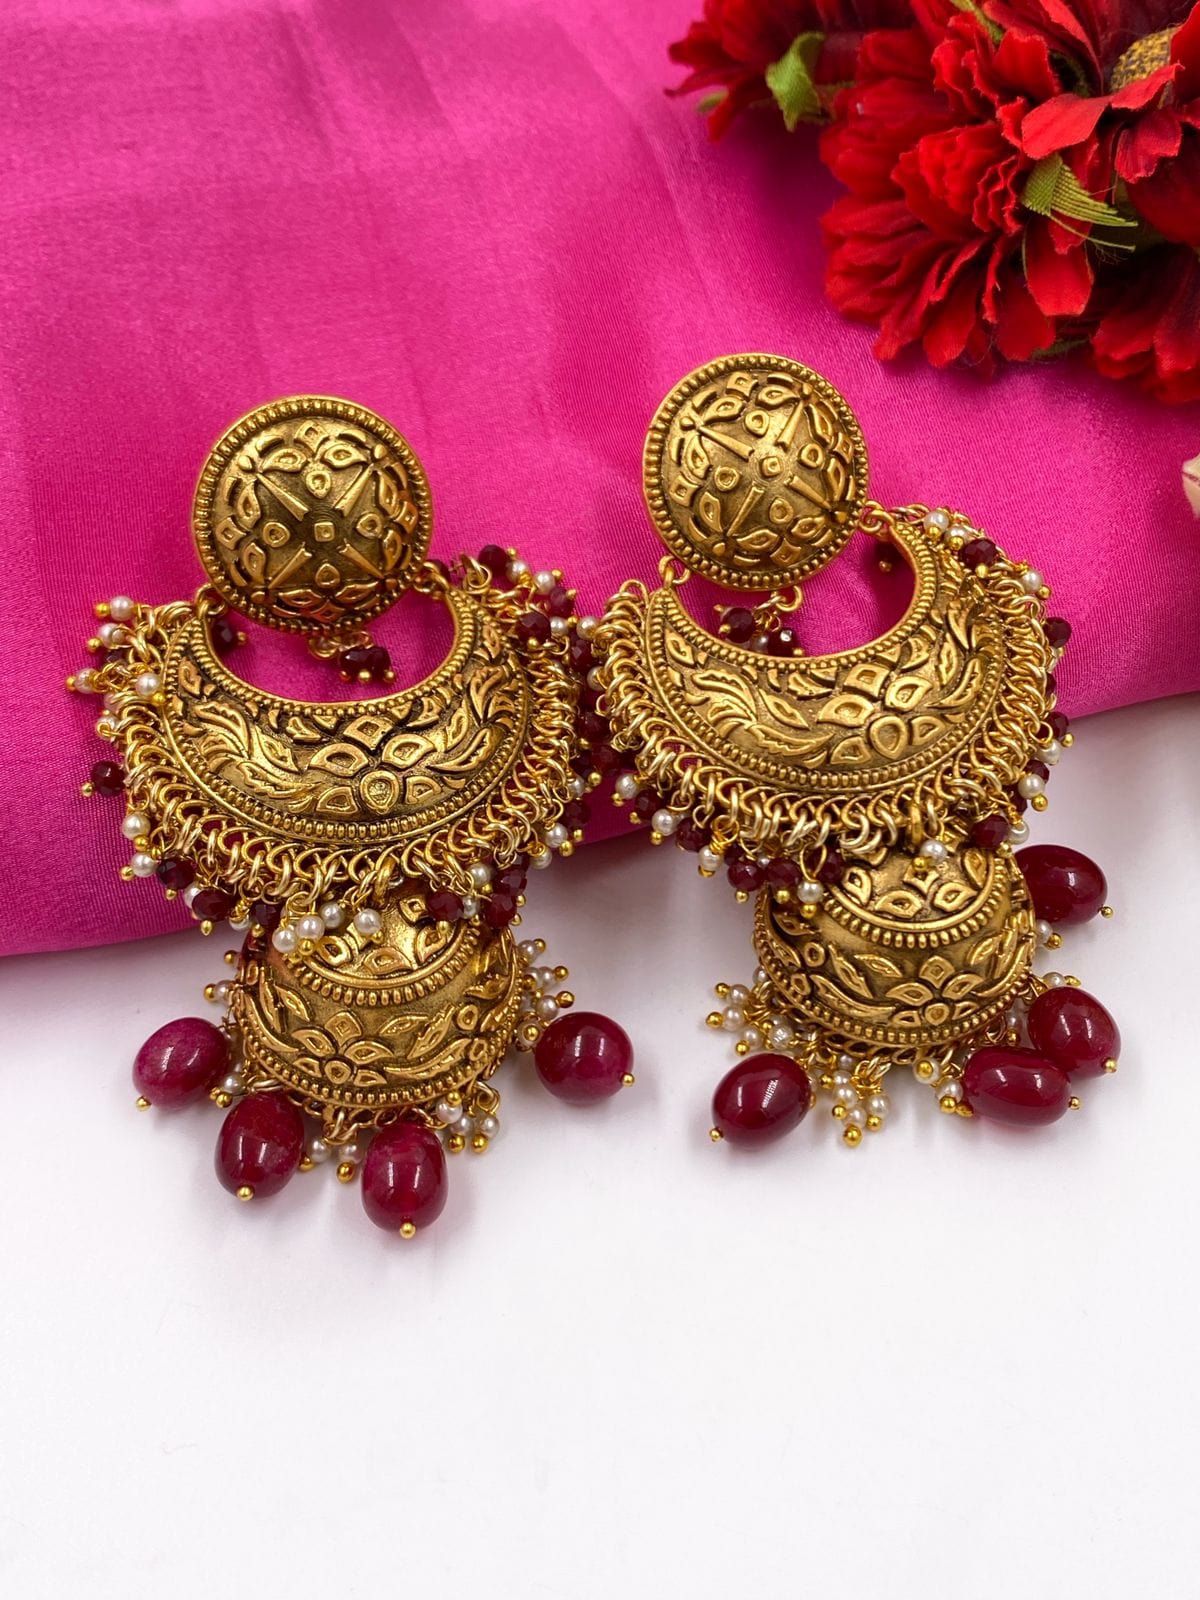 Traditional Gold Plated Long Golden Jhumka Earrings For Ladies By Gehna Shop Jhumka earrings